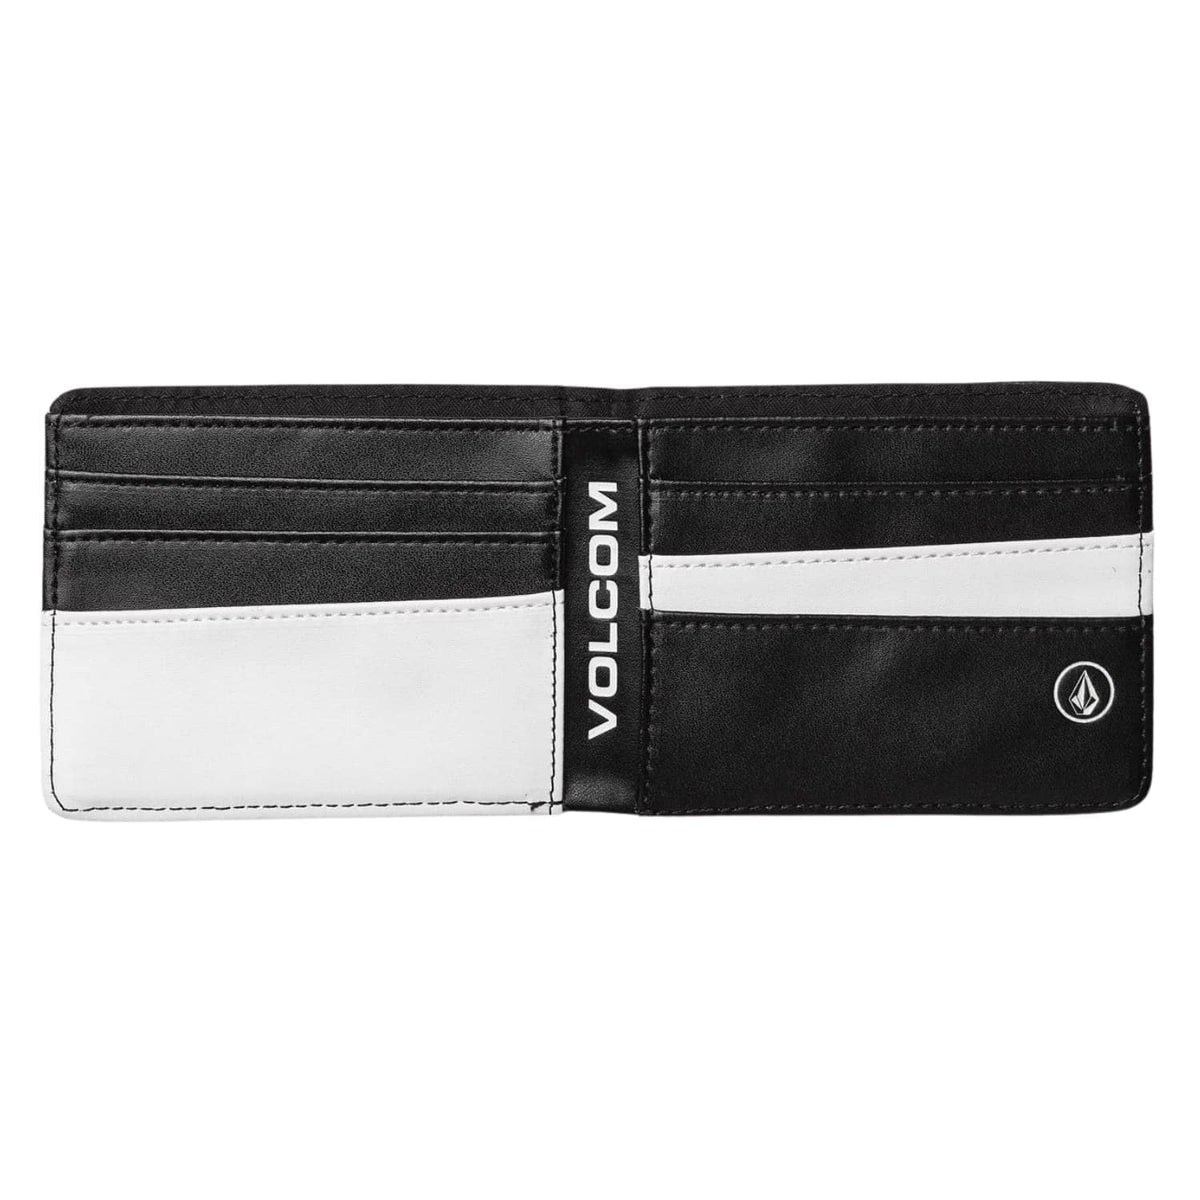 Volcom Corps PU Wallet - Black - One Size